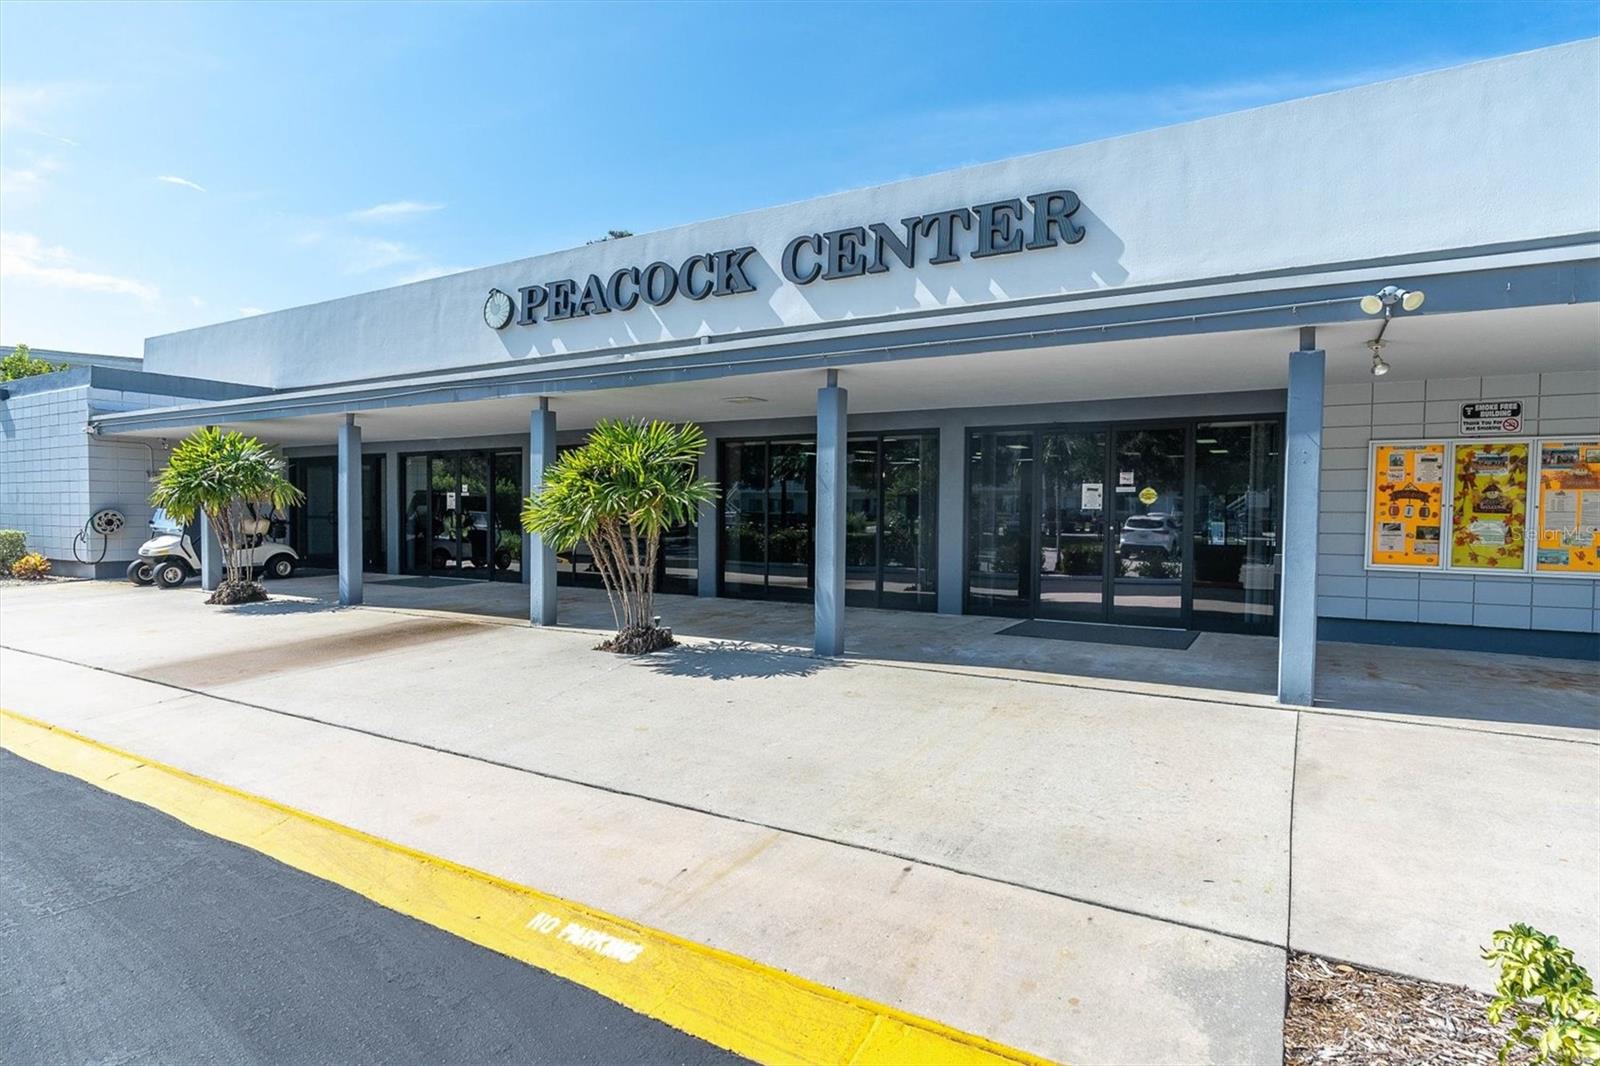 Peacock Center is part of the Recreation area at Seminole Gardens, with a giant theater and stage, billiards, card tables for games and clubs, fitness area, lending library, on-site property management, heated pool and spa, huge patio for gathering and chilling, shuffleboard.